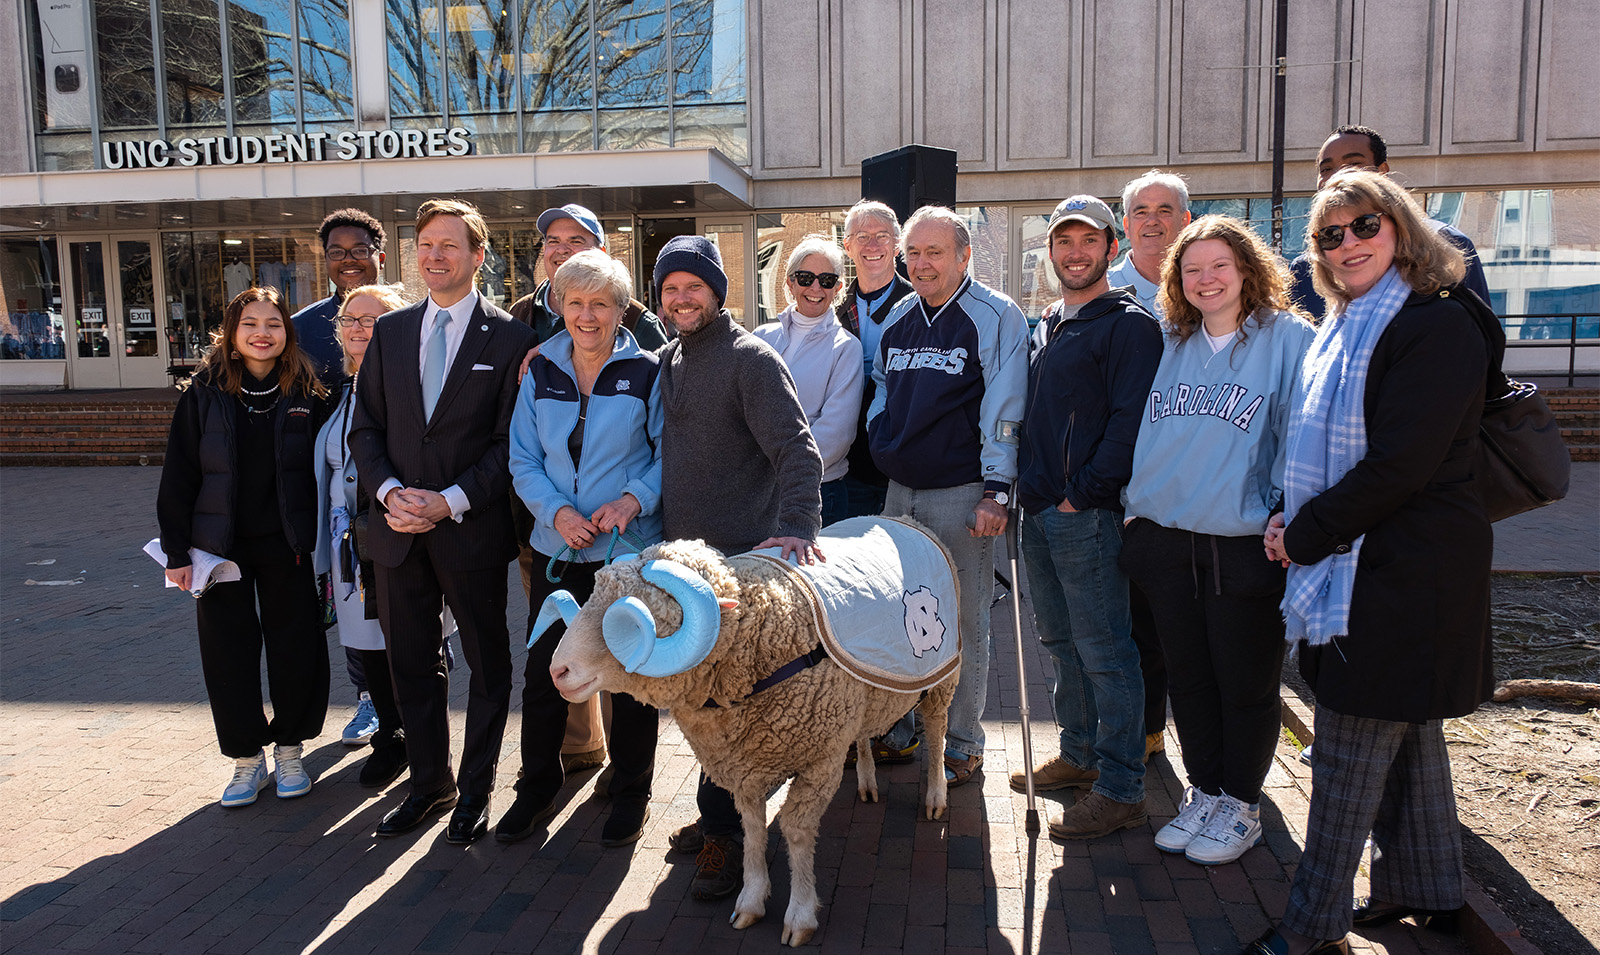 A group of people posing with a live ram mascot, Rameses, on the campus of UNC-Chapel Hill.